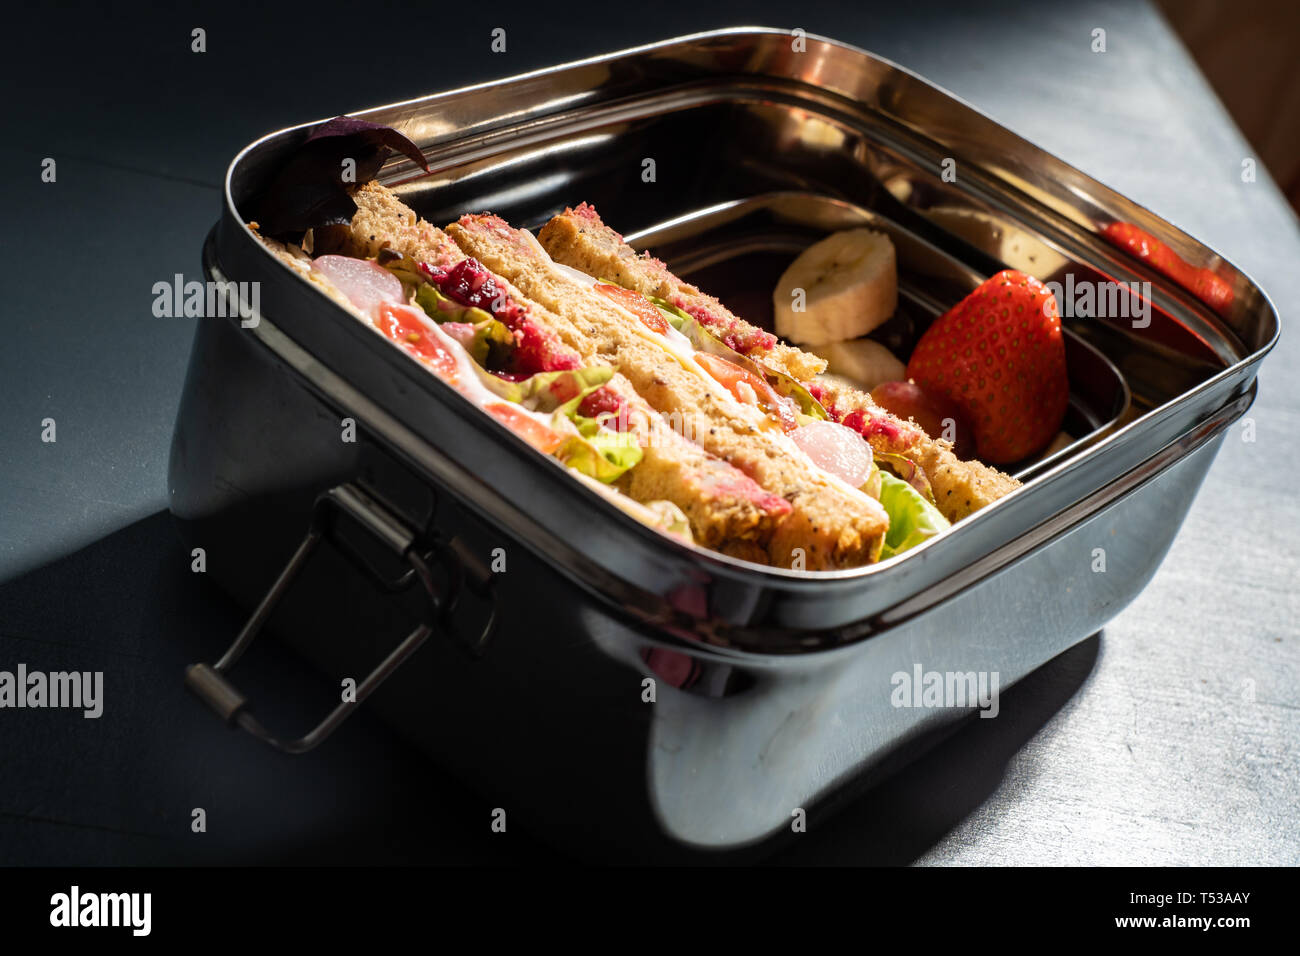 Healthy sandwiches on brown seeded bread and mixed fruit snacks in a stainless steel lunch box with compartments. Re-usable stainless steel means no p Stock Photo